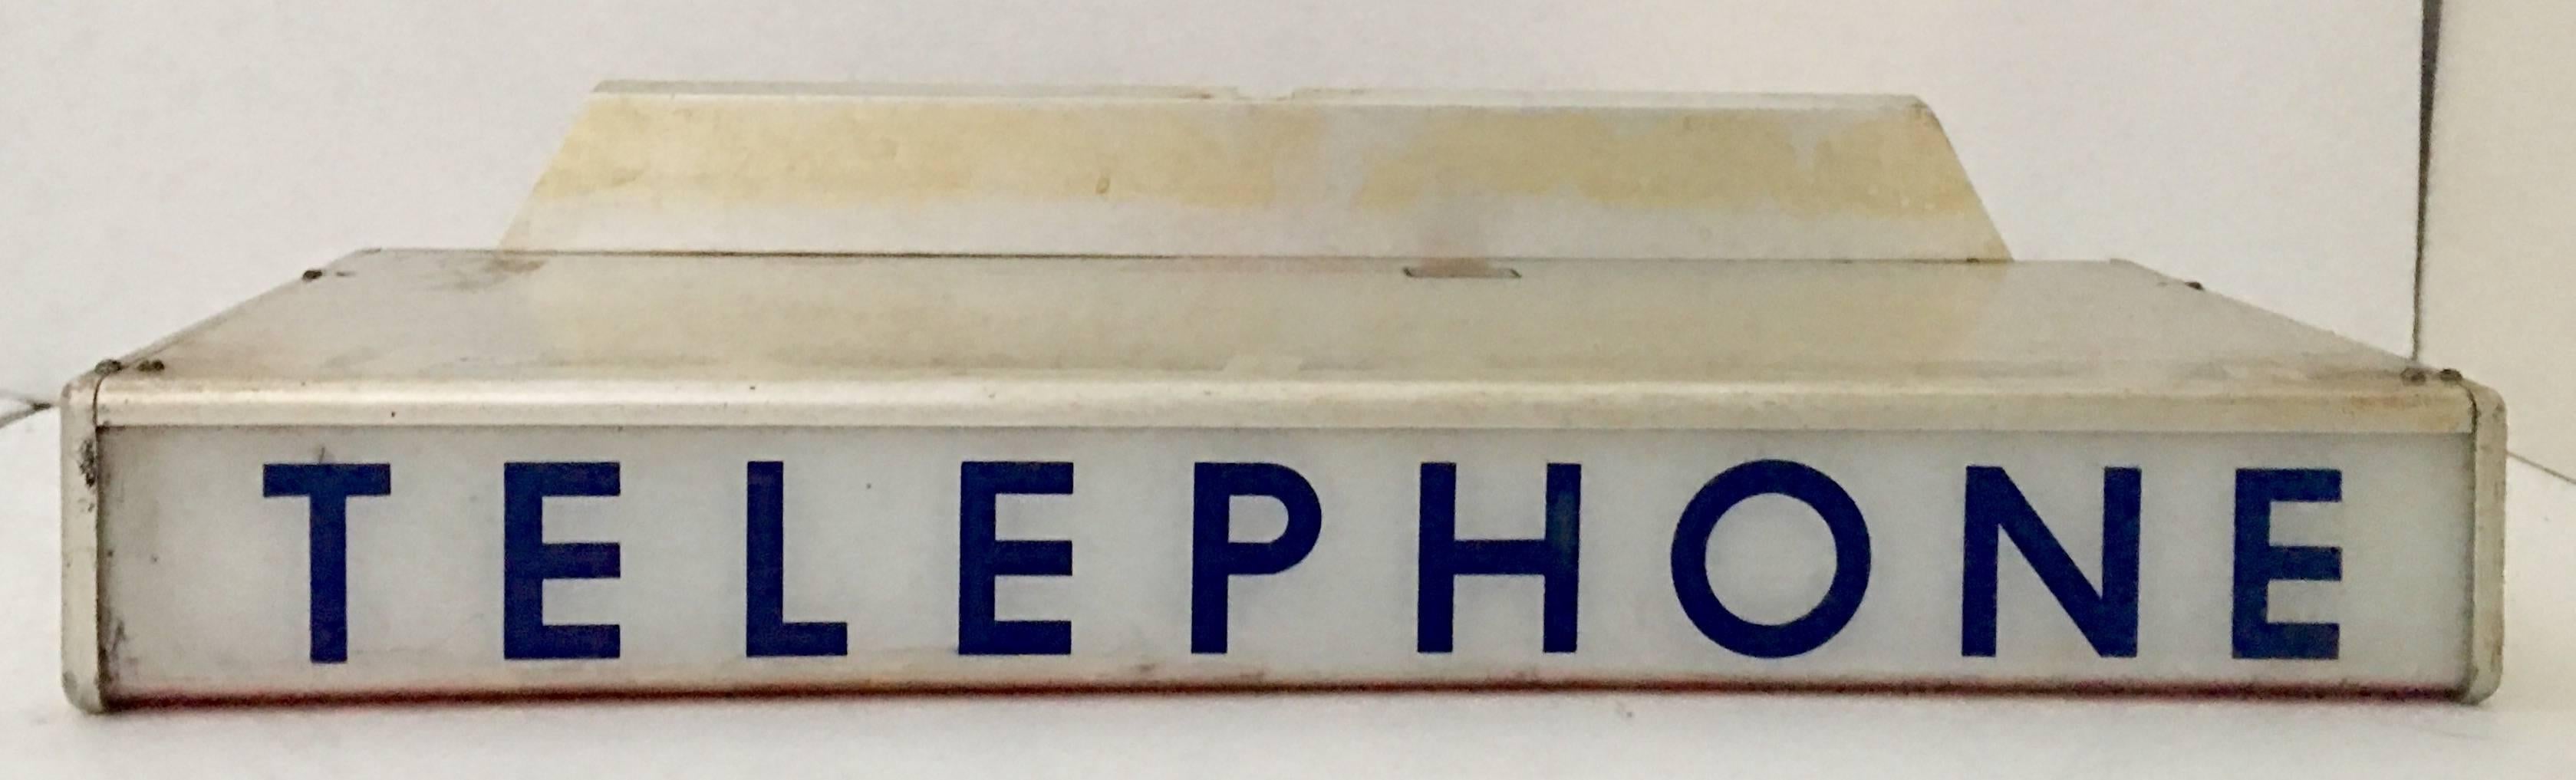 Extremely cool and rare vintage, electrified stainless steel and plastic/resin telephone booth light box sign insert. Manufactured by, Geeco Inc. of Kansas in 1932 for the Western Electric company. The sign is reverse printed on plastic. The sign is